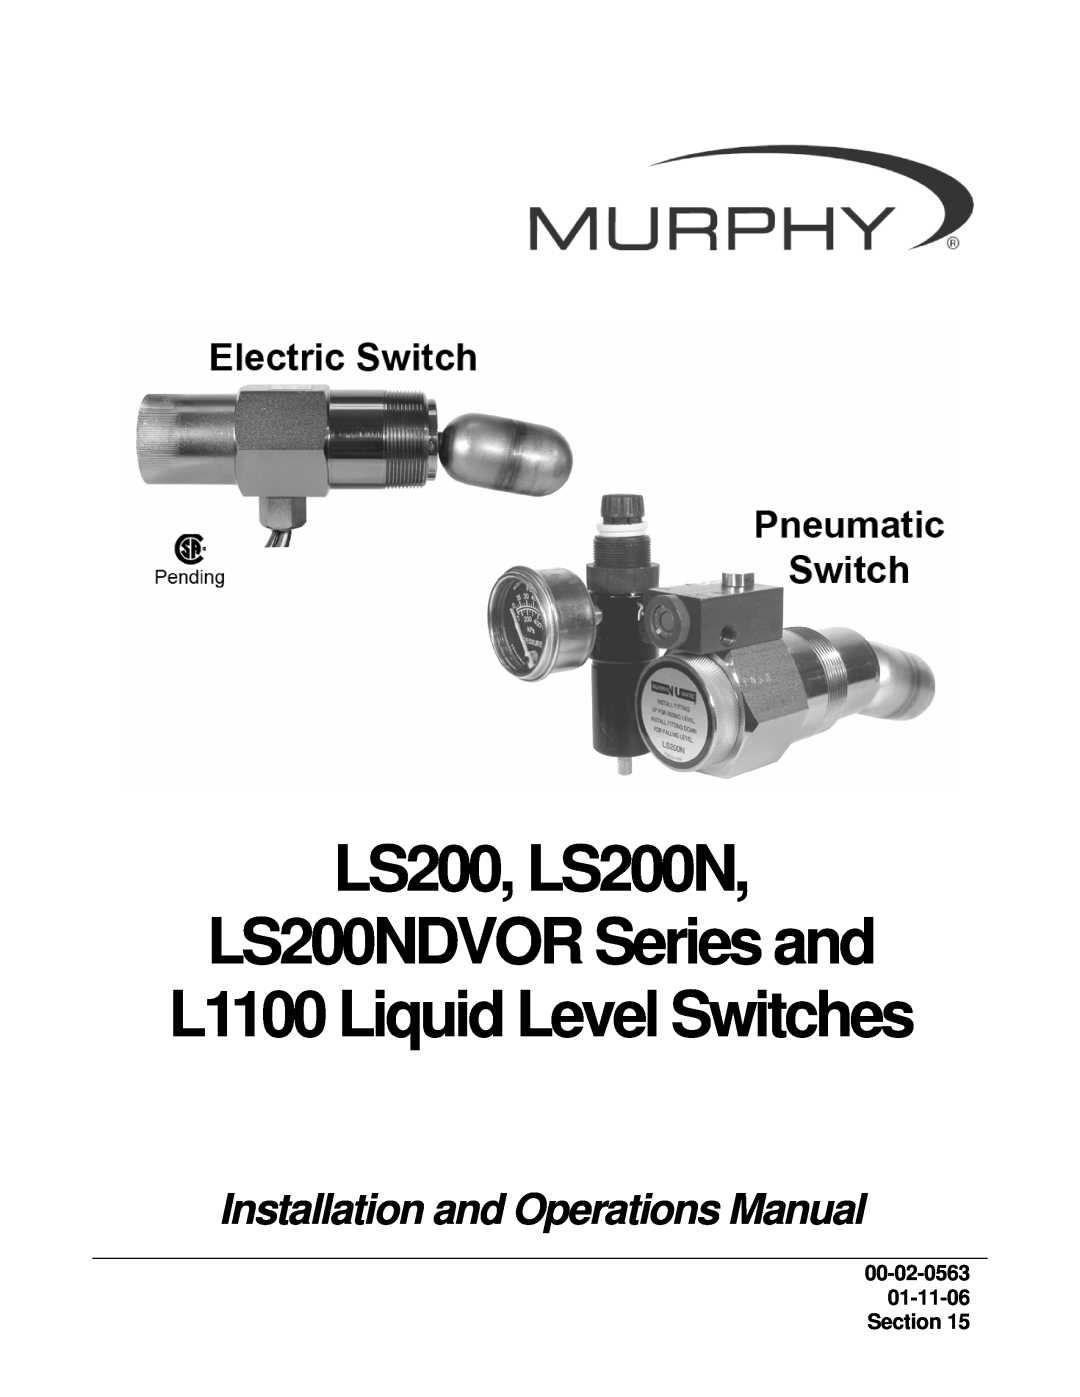 Murphy manual 00-02-0563 01-11-06 Section, LS200, LS200N LS200NDVOR Series and L1100 Liquid Level Switches 